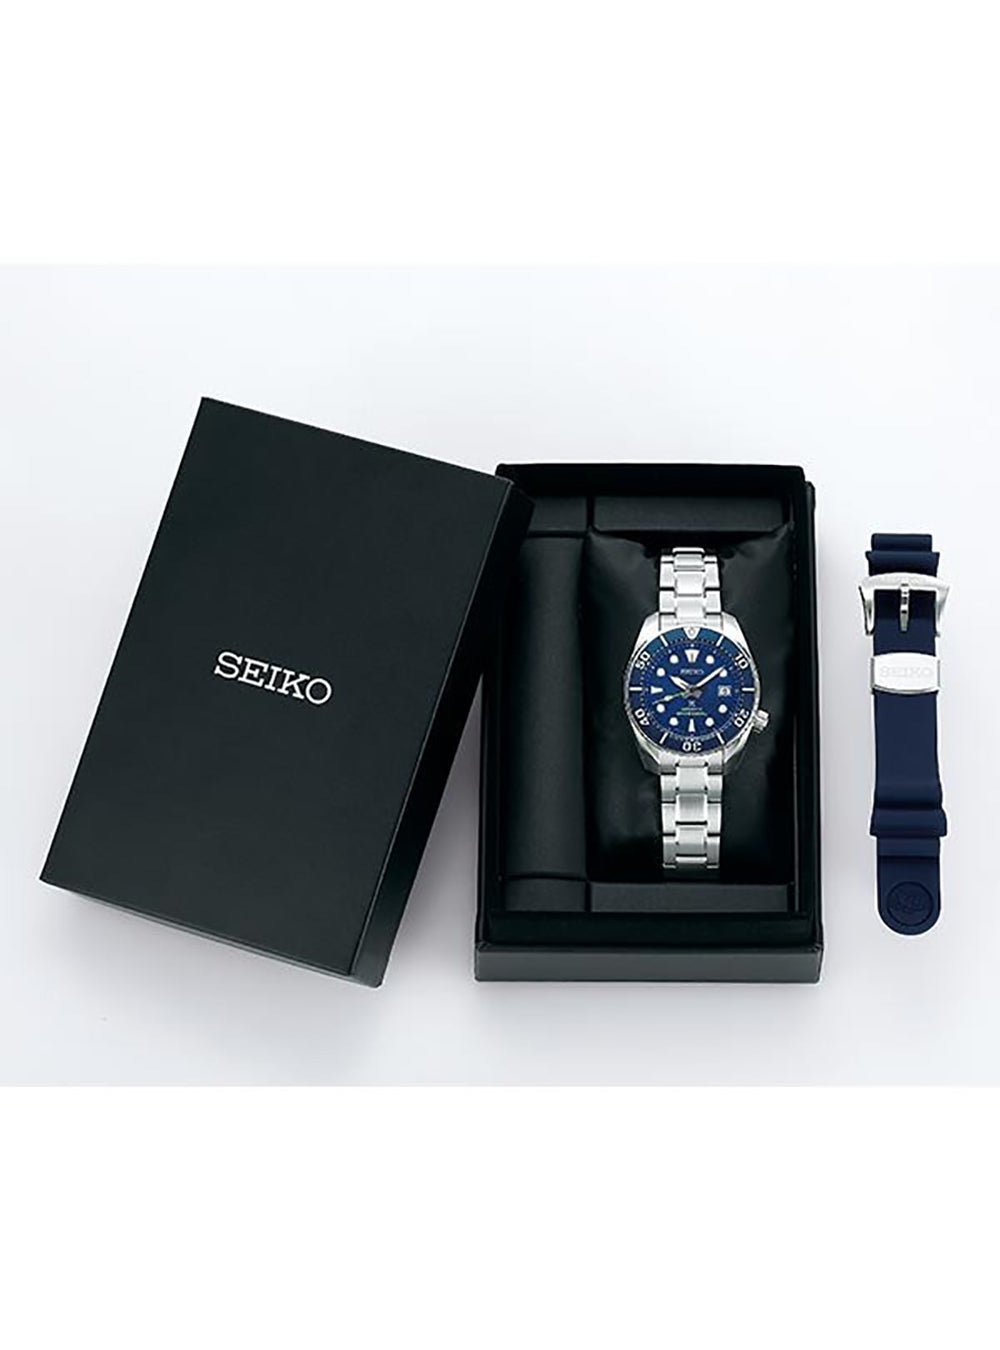 SEIKO PROSPEX JAPAN COLLECTION 2020 LIMITED EDITION SBDC113 MADE IN JAPAN JDMWRISTWATCHjapan-select